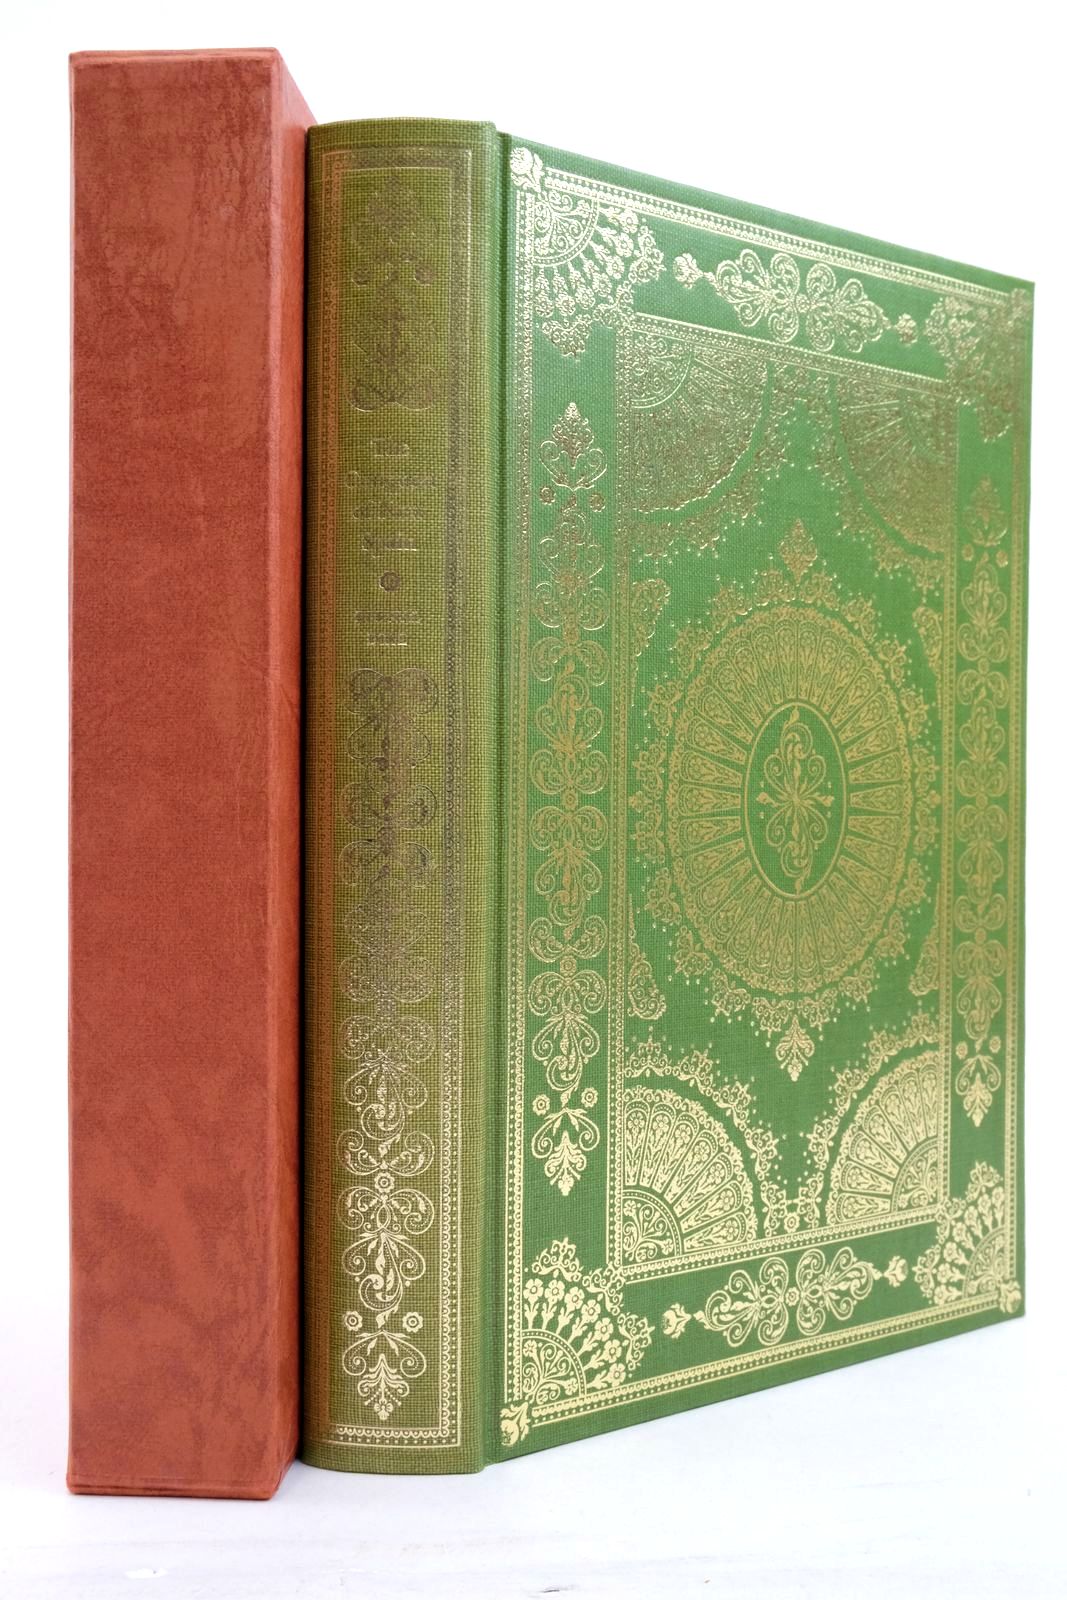 Photo of THE CONQUEST OF NEW SPAIN written by Diaz, Bernal Cohen, J.M. published by Folio Society (STOCK CODE: 2138376)  for sale by Stella & Rose's Books